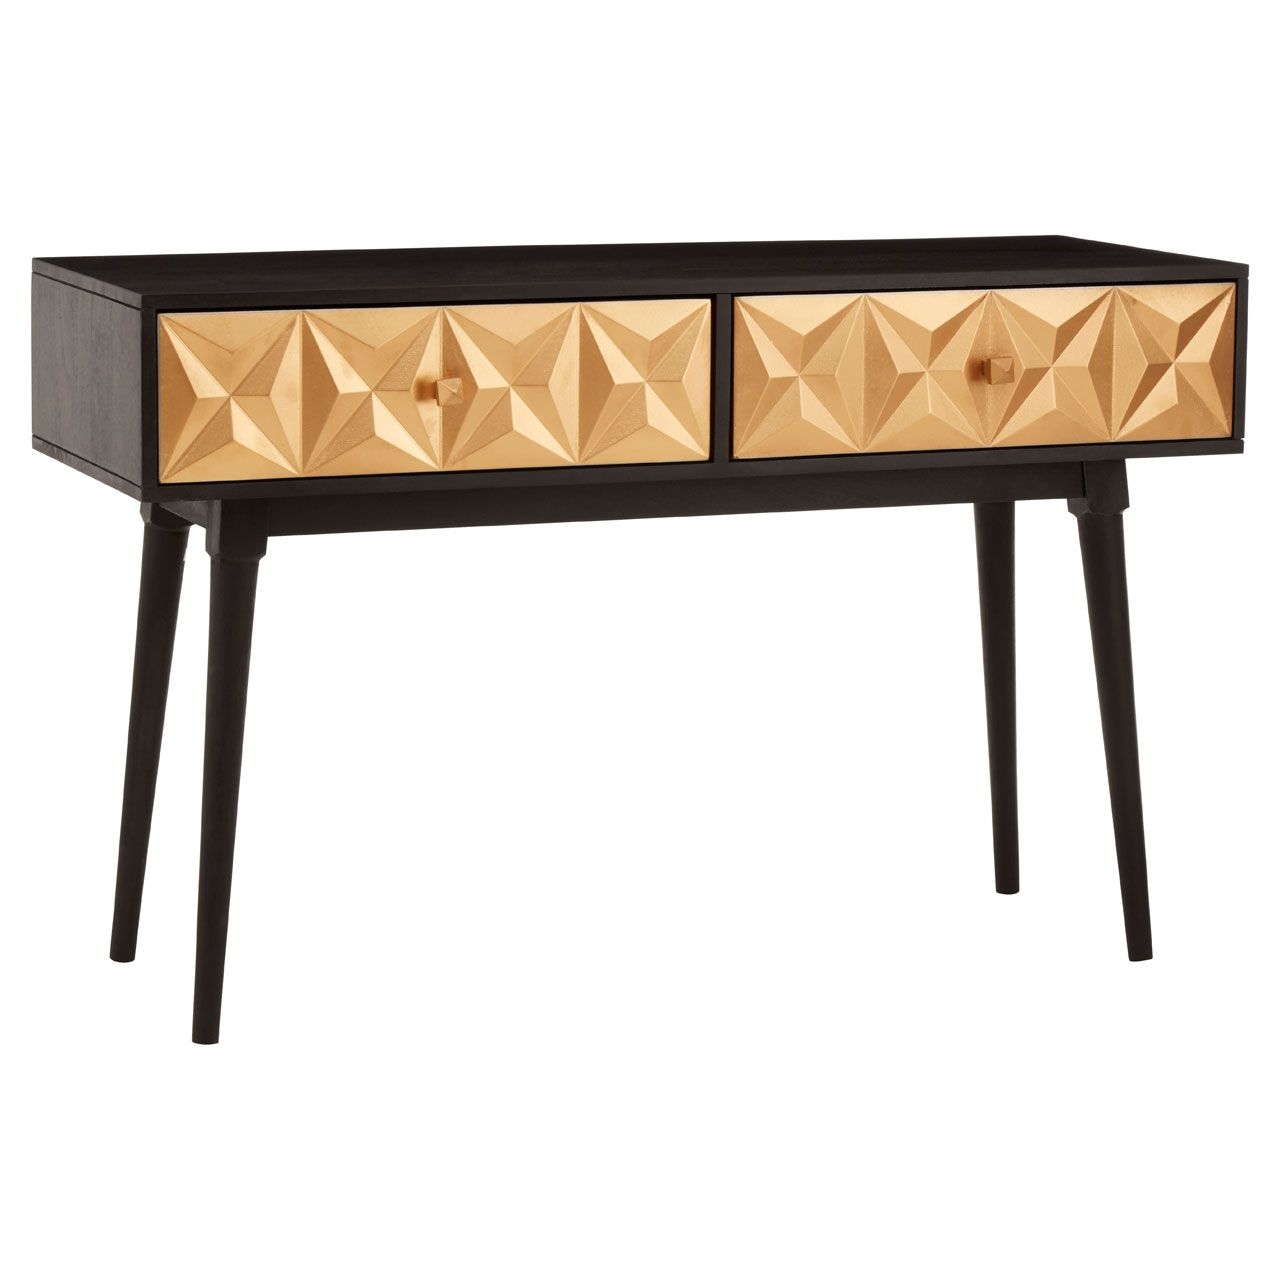 Malta Wooden Console Table In Black And Gold Palette